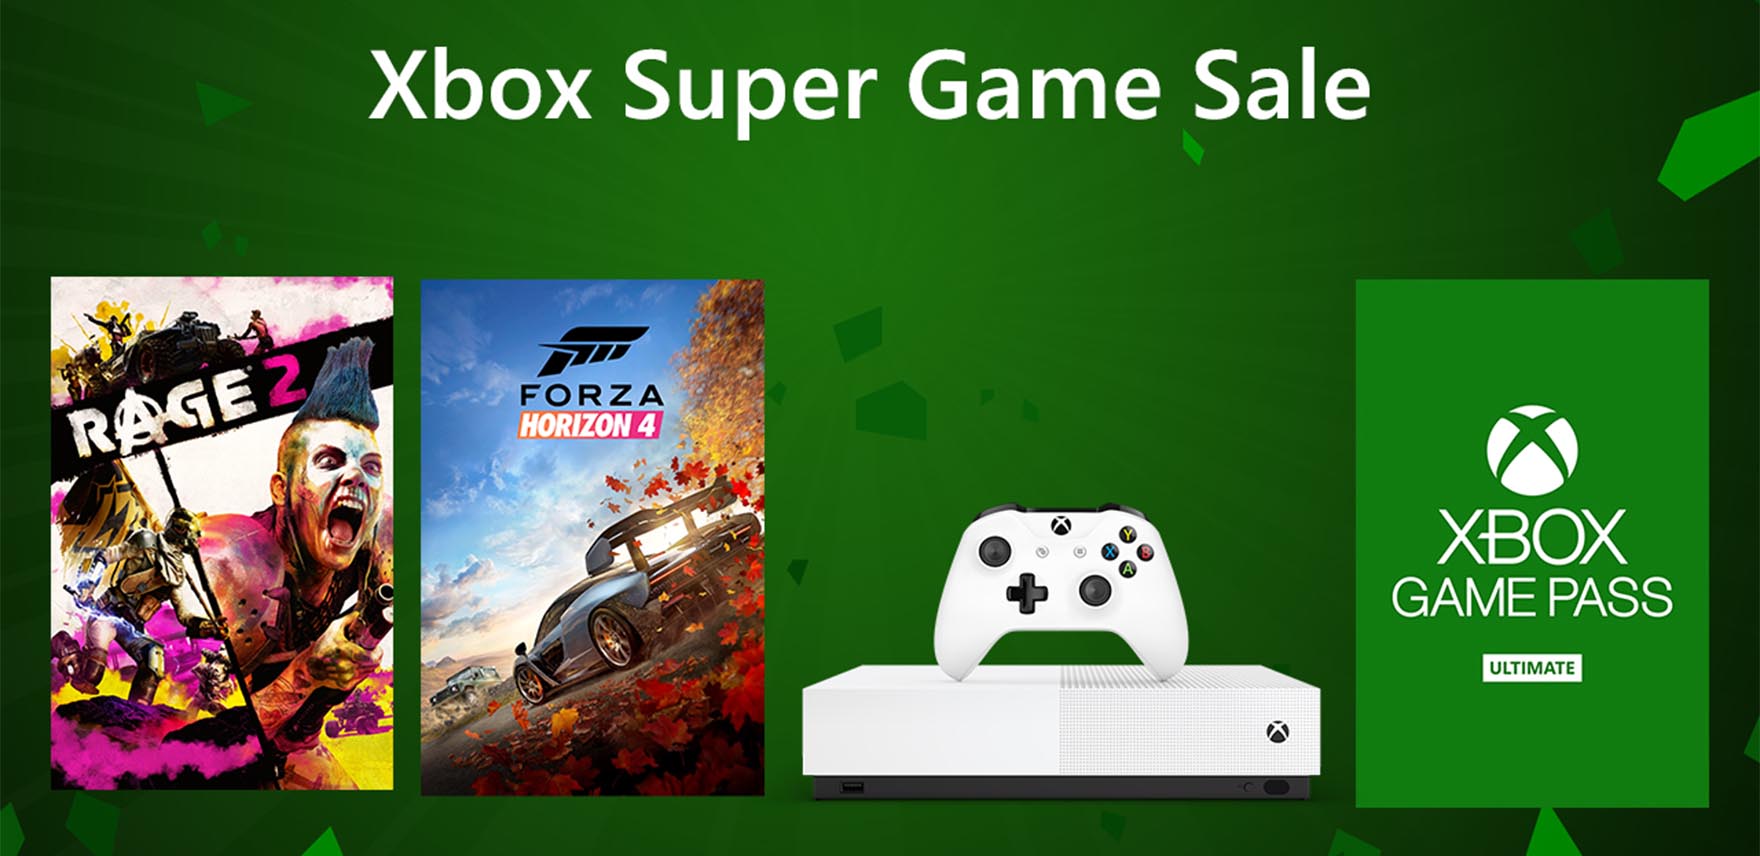 5 Ways Pc Gamers Can Save Big During The Xbox Super Game Sale Windows Experience Blog